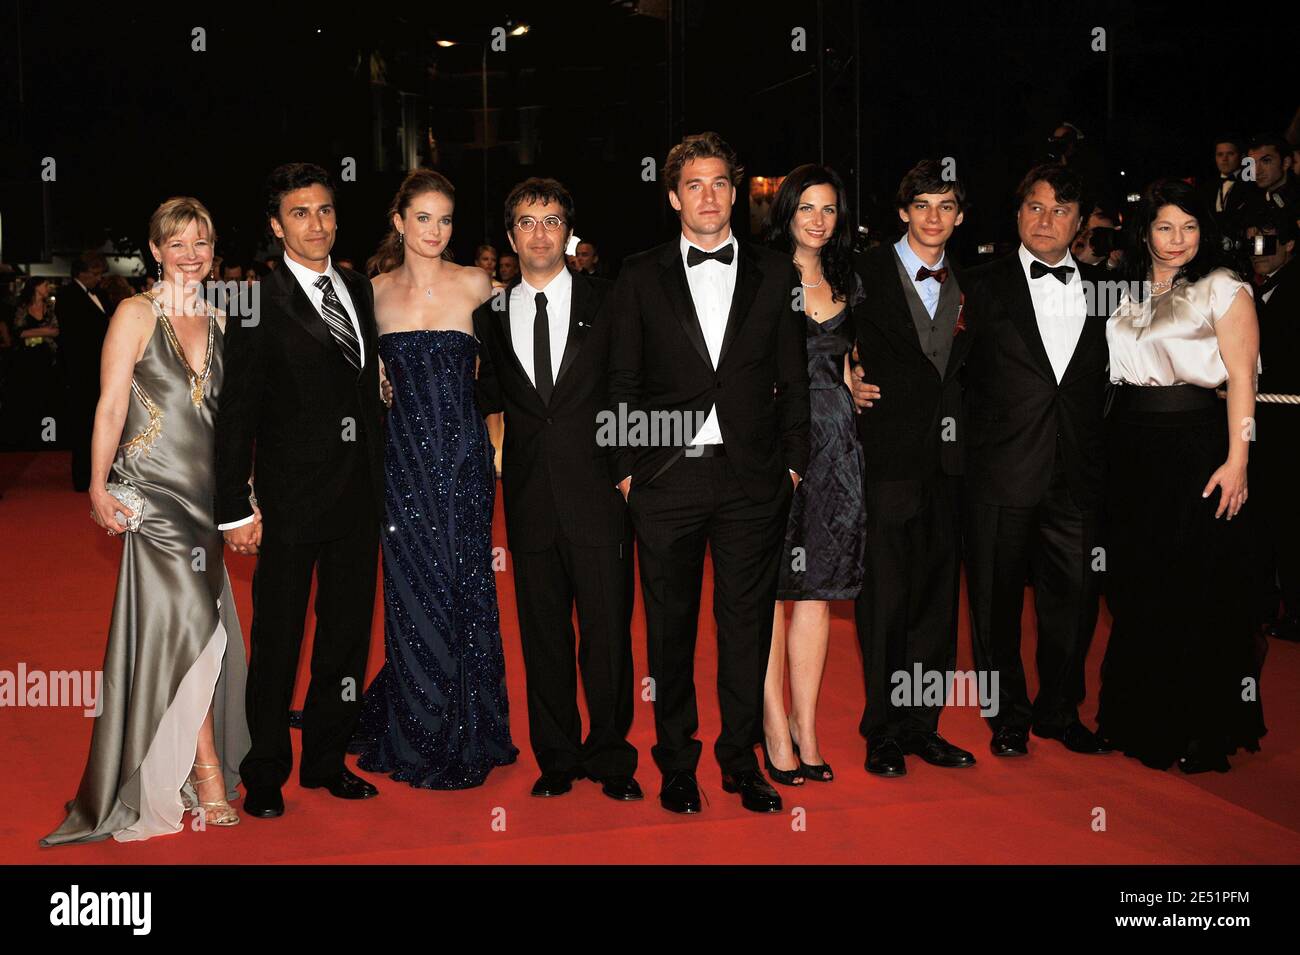 The cast of Adoration Devon Bostick, Scott Speedman, Rachel Blanchard and Atom Egoyan seen arriving at the Palais des Festivals in Cannes, Southern France, May 22, 2008, for the screening of Atom Egoyan's Adoration presented in competition at the 61st Cannes Film Festival. Photo by Hahn-Nebinger-Orban/ABACAPRESS.COM Stock Photo